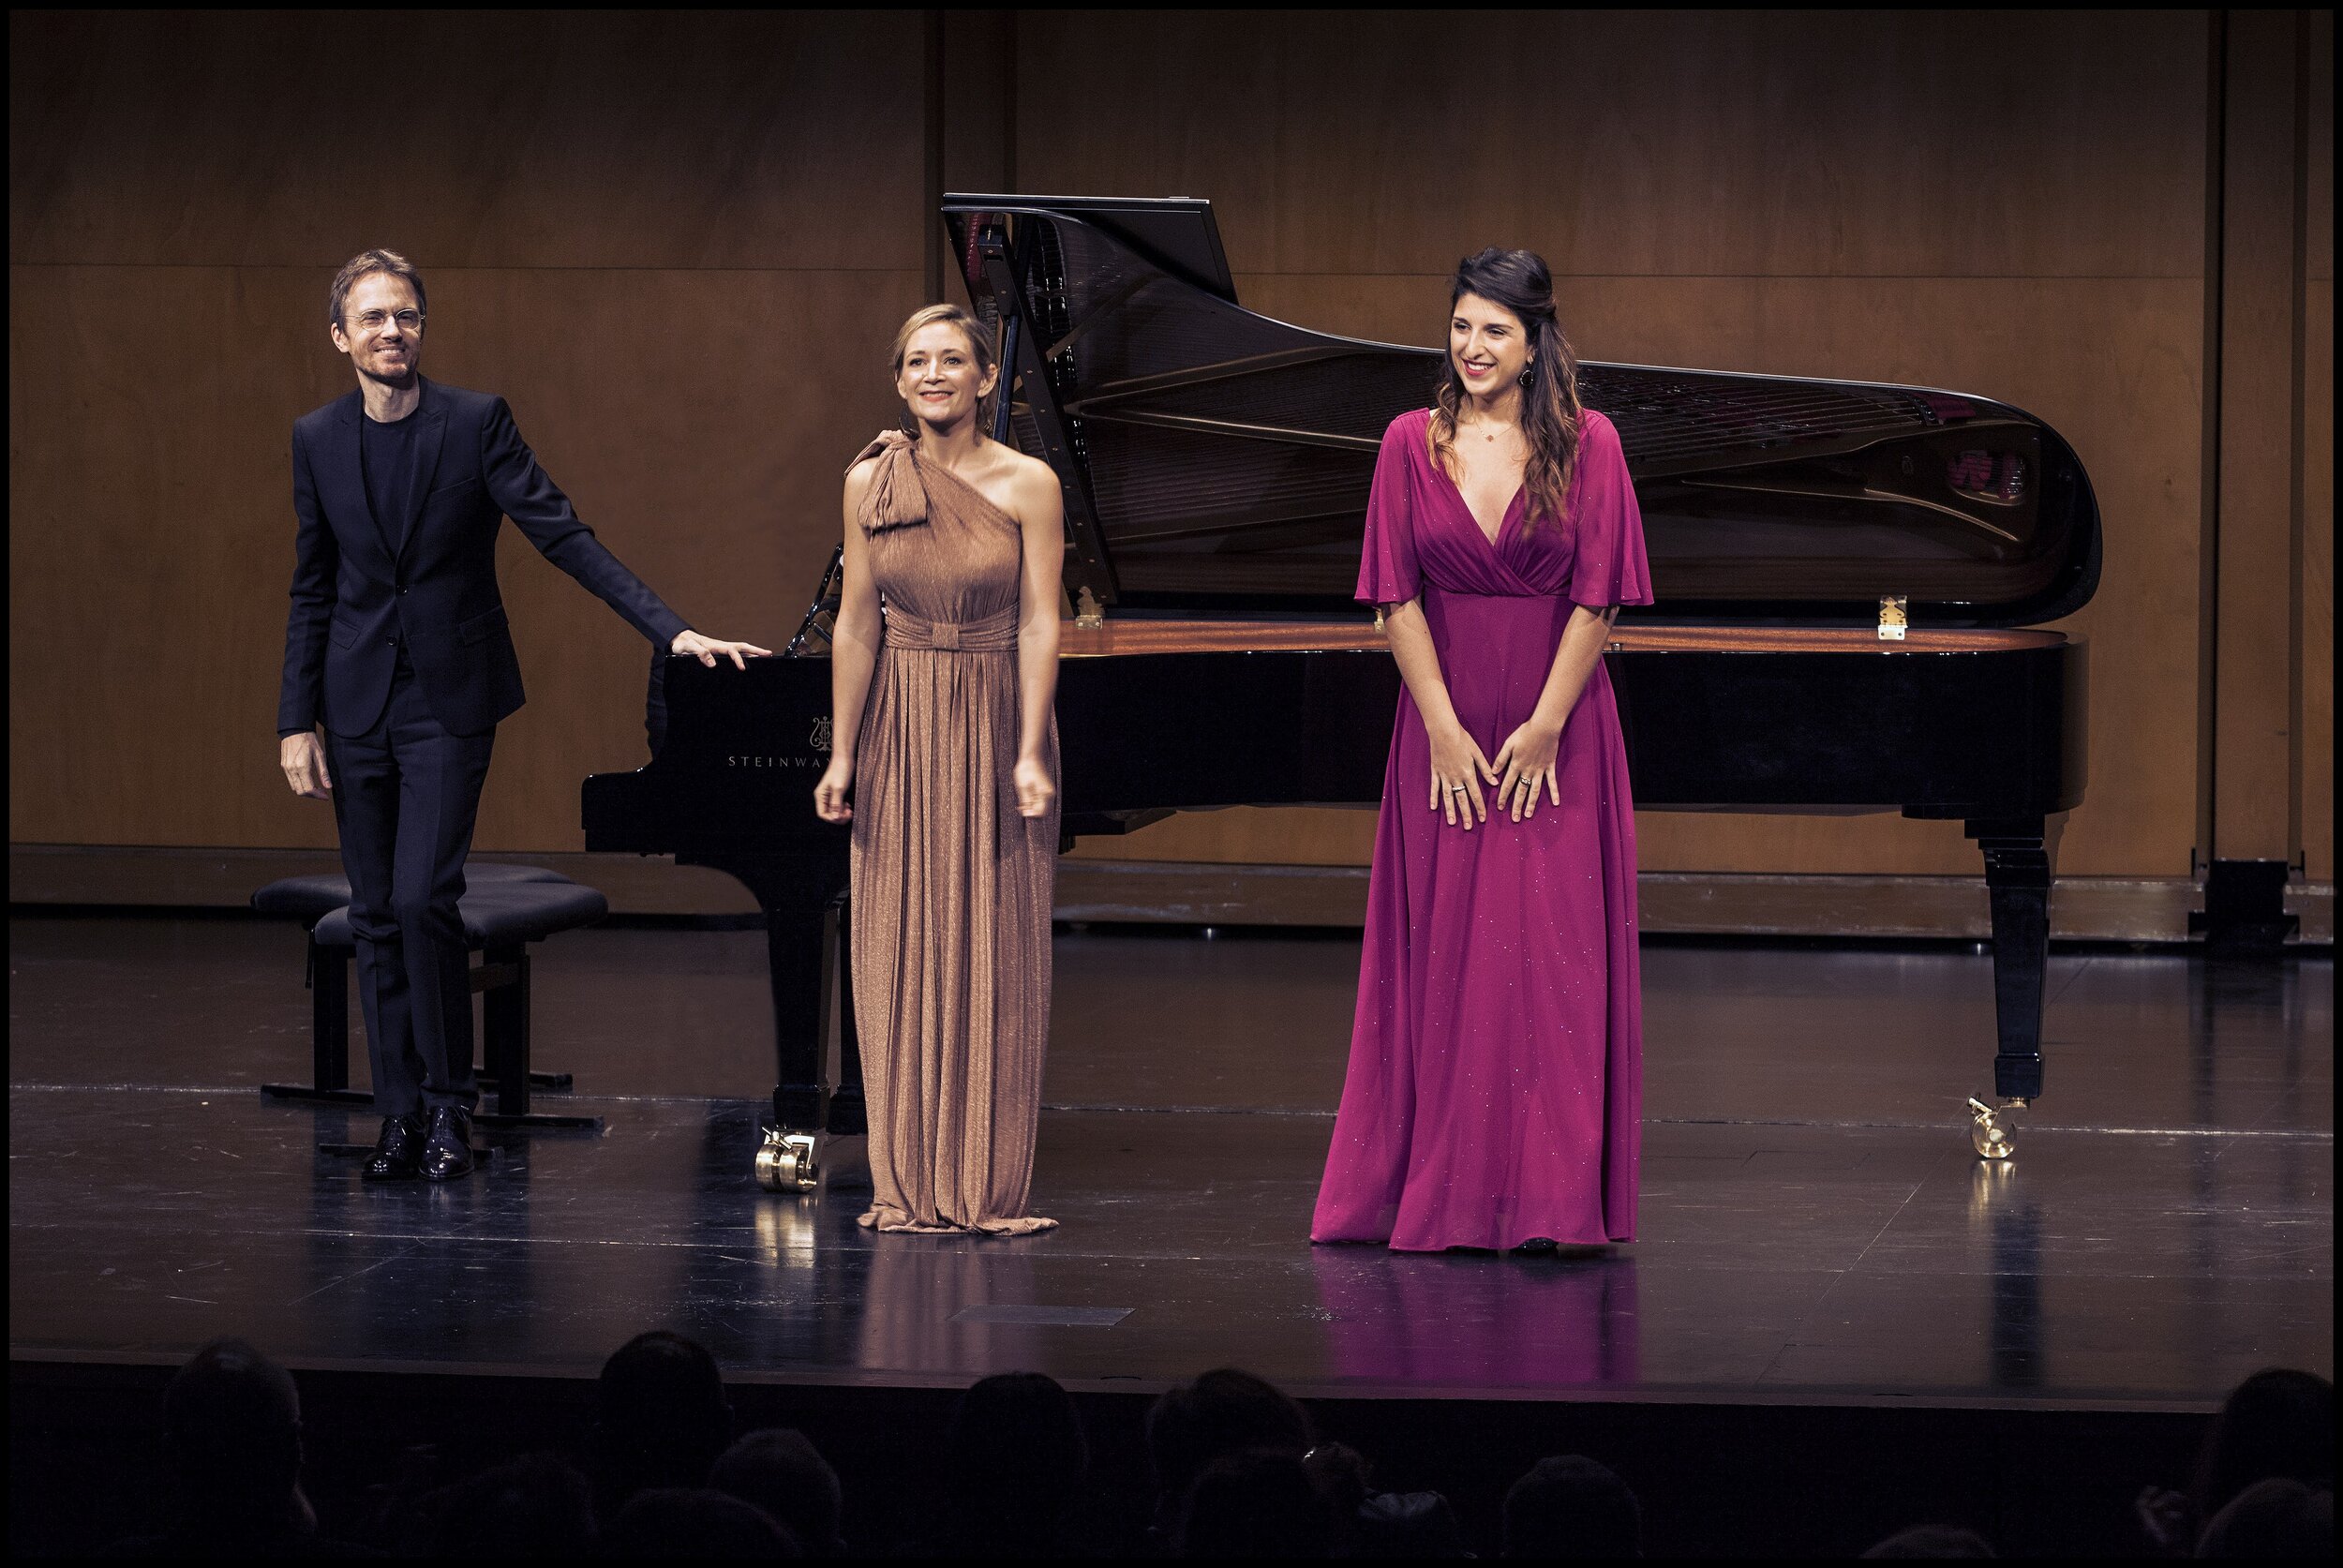 On September 28, Sabine Devieilhe and Alexandre Tharaud launched Momentum in France by inviting mezzo-soprano Lise Nougier to join them at the Théâtre des Champs-Elysées!